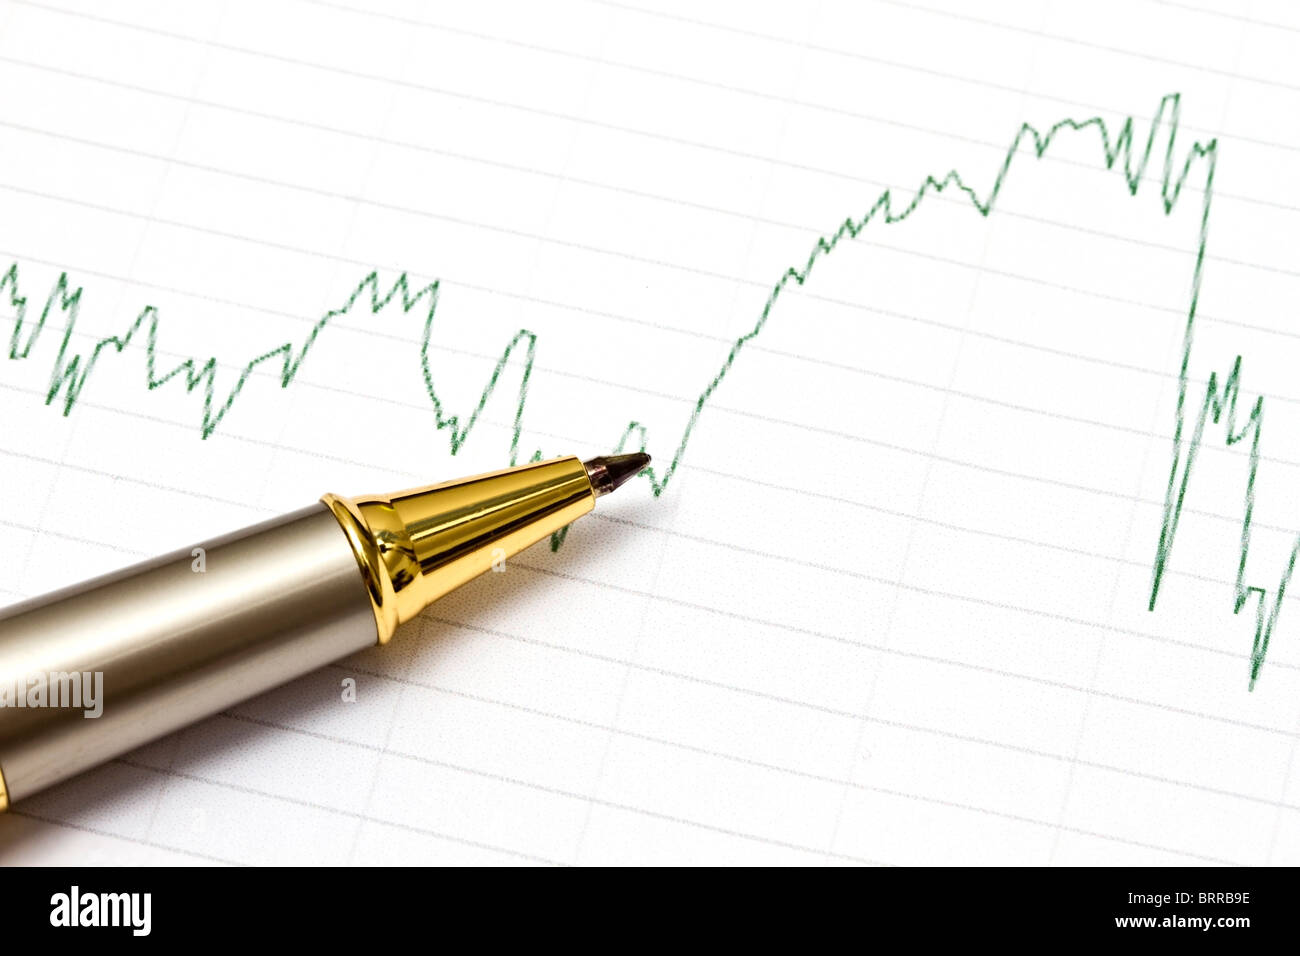 Background of business graph and a pen Stock Photo